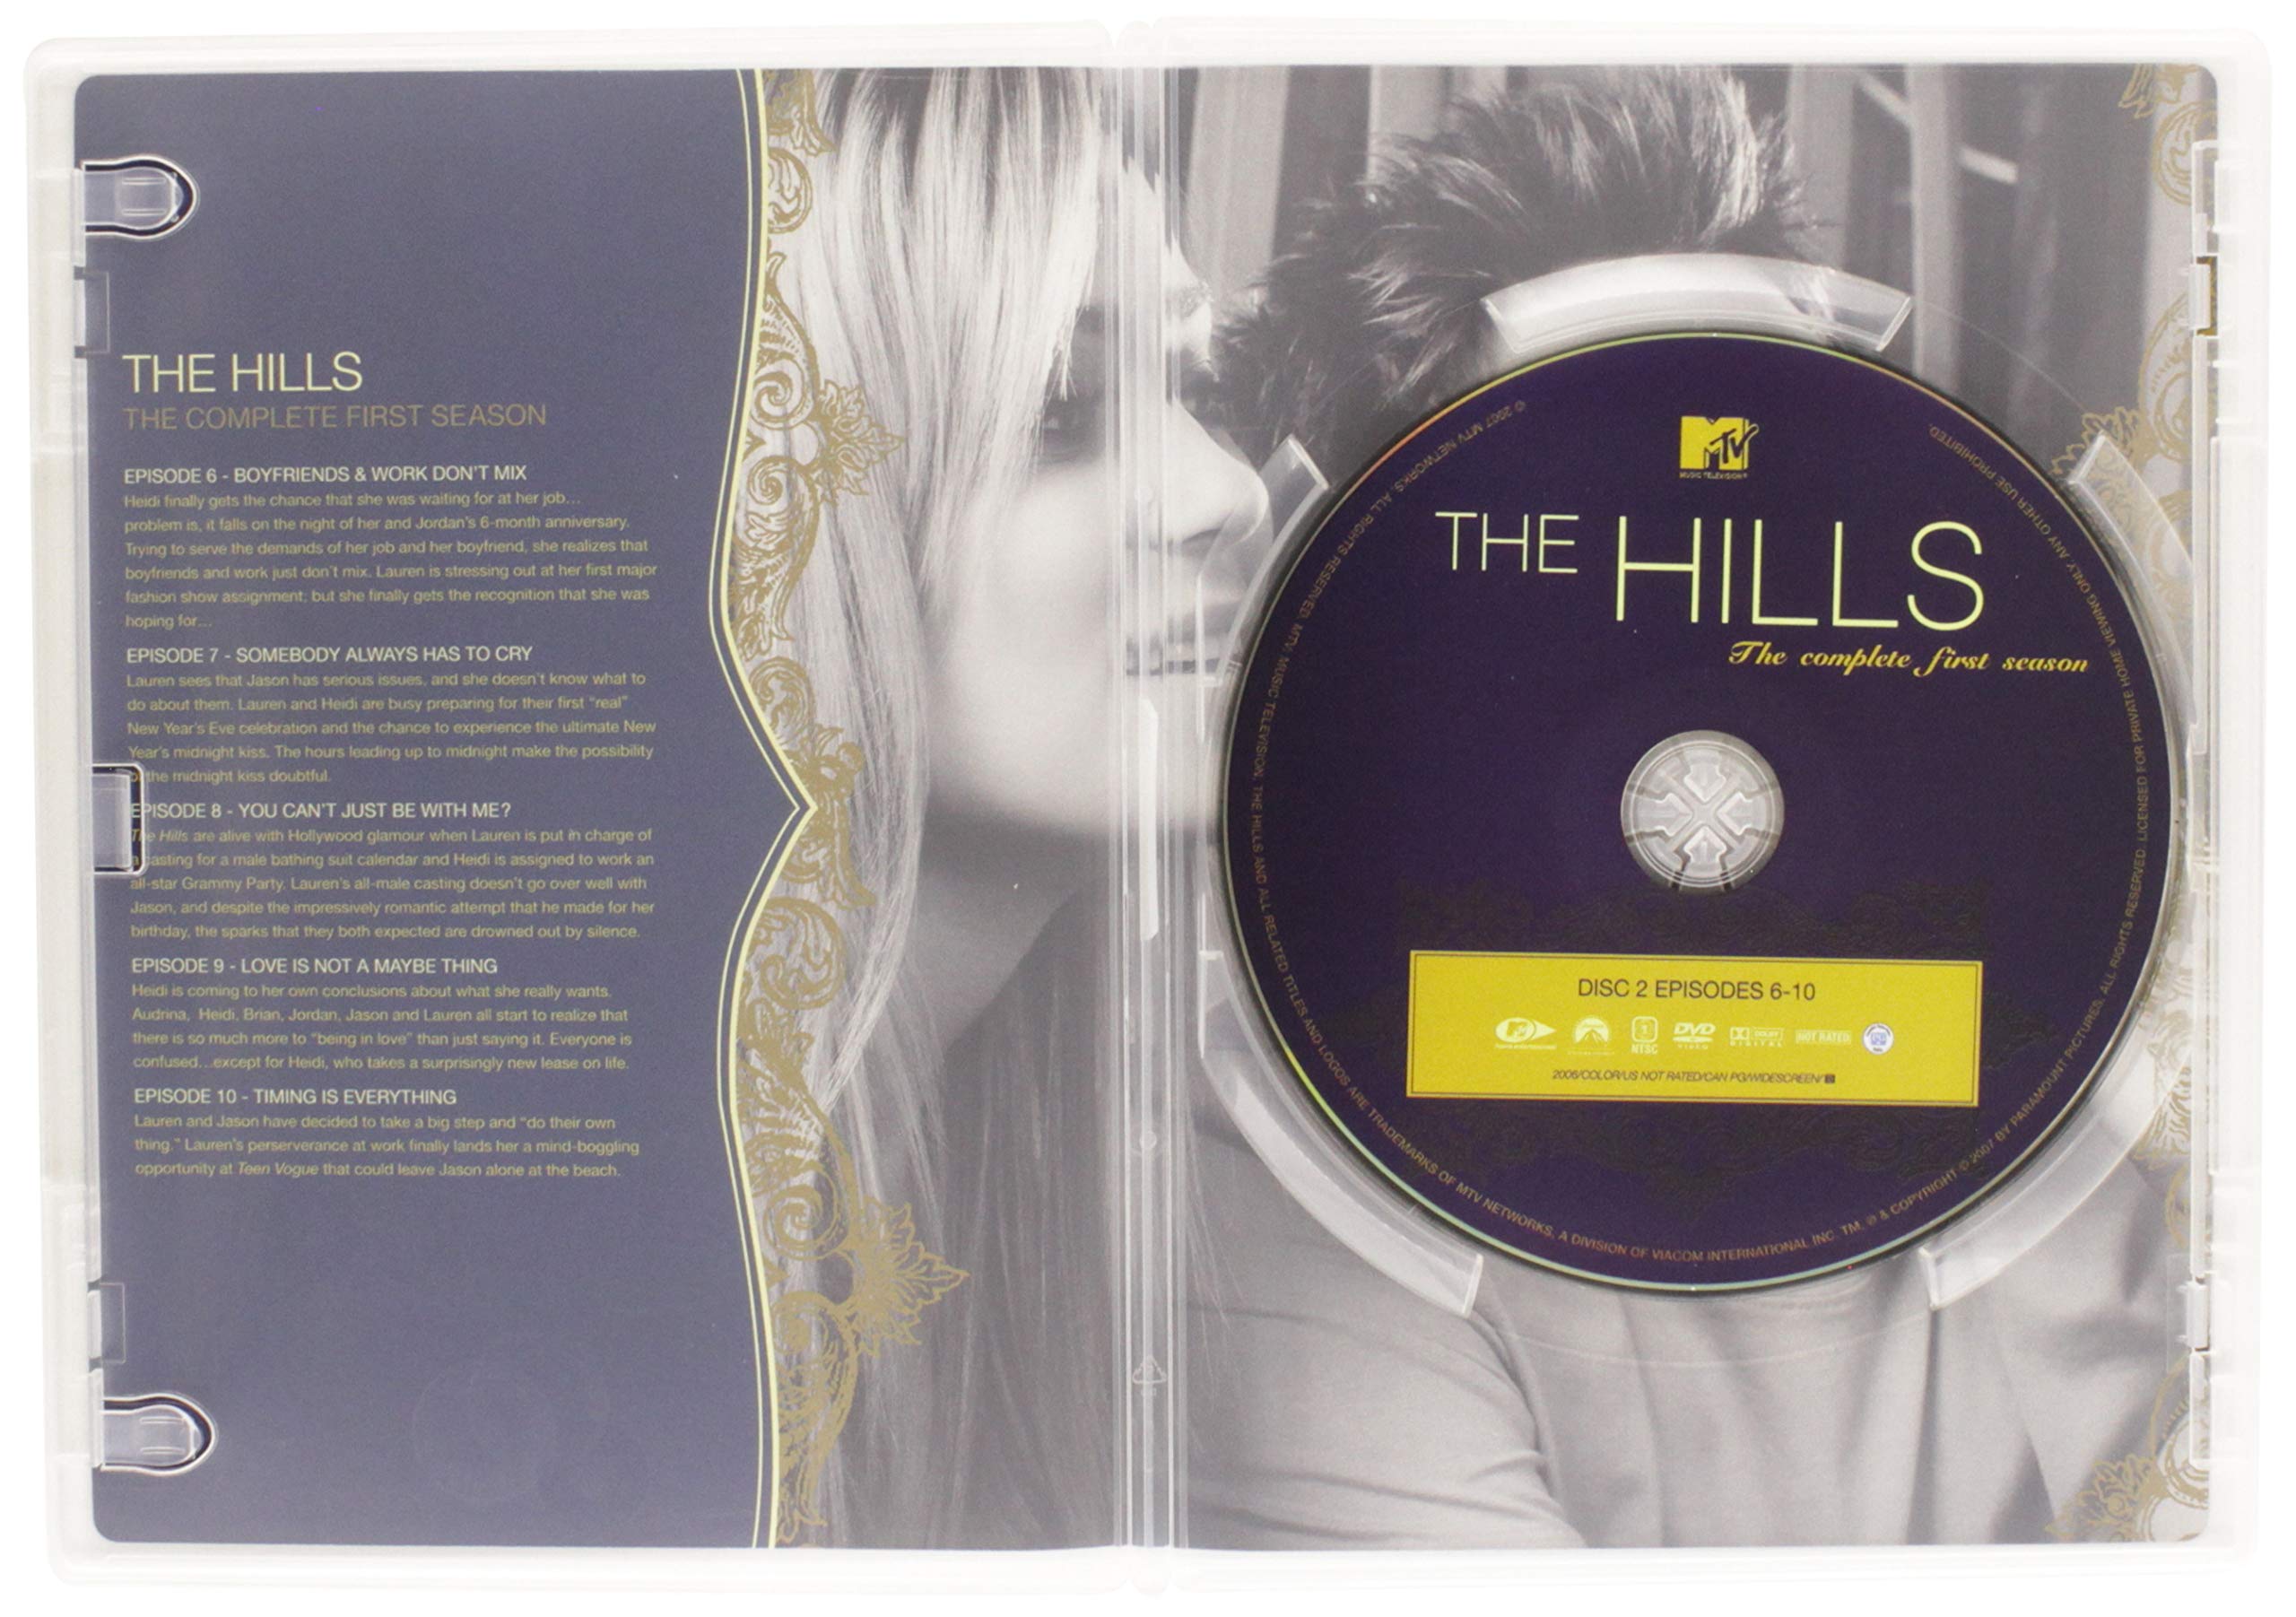 The Hills: The Complete First Season (DVD) - image 5 of 7